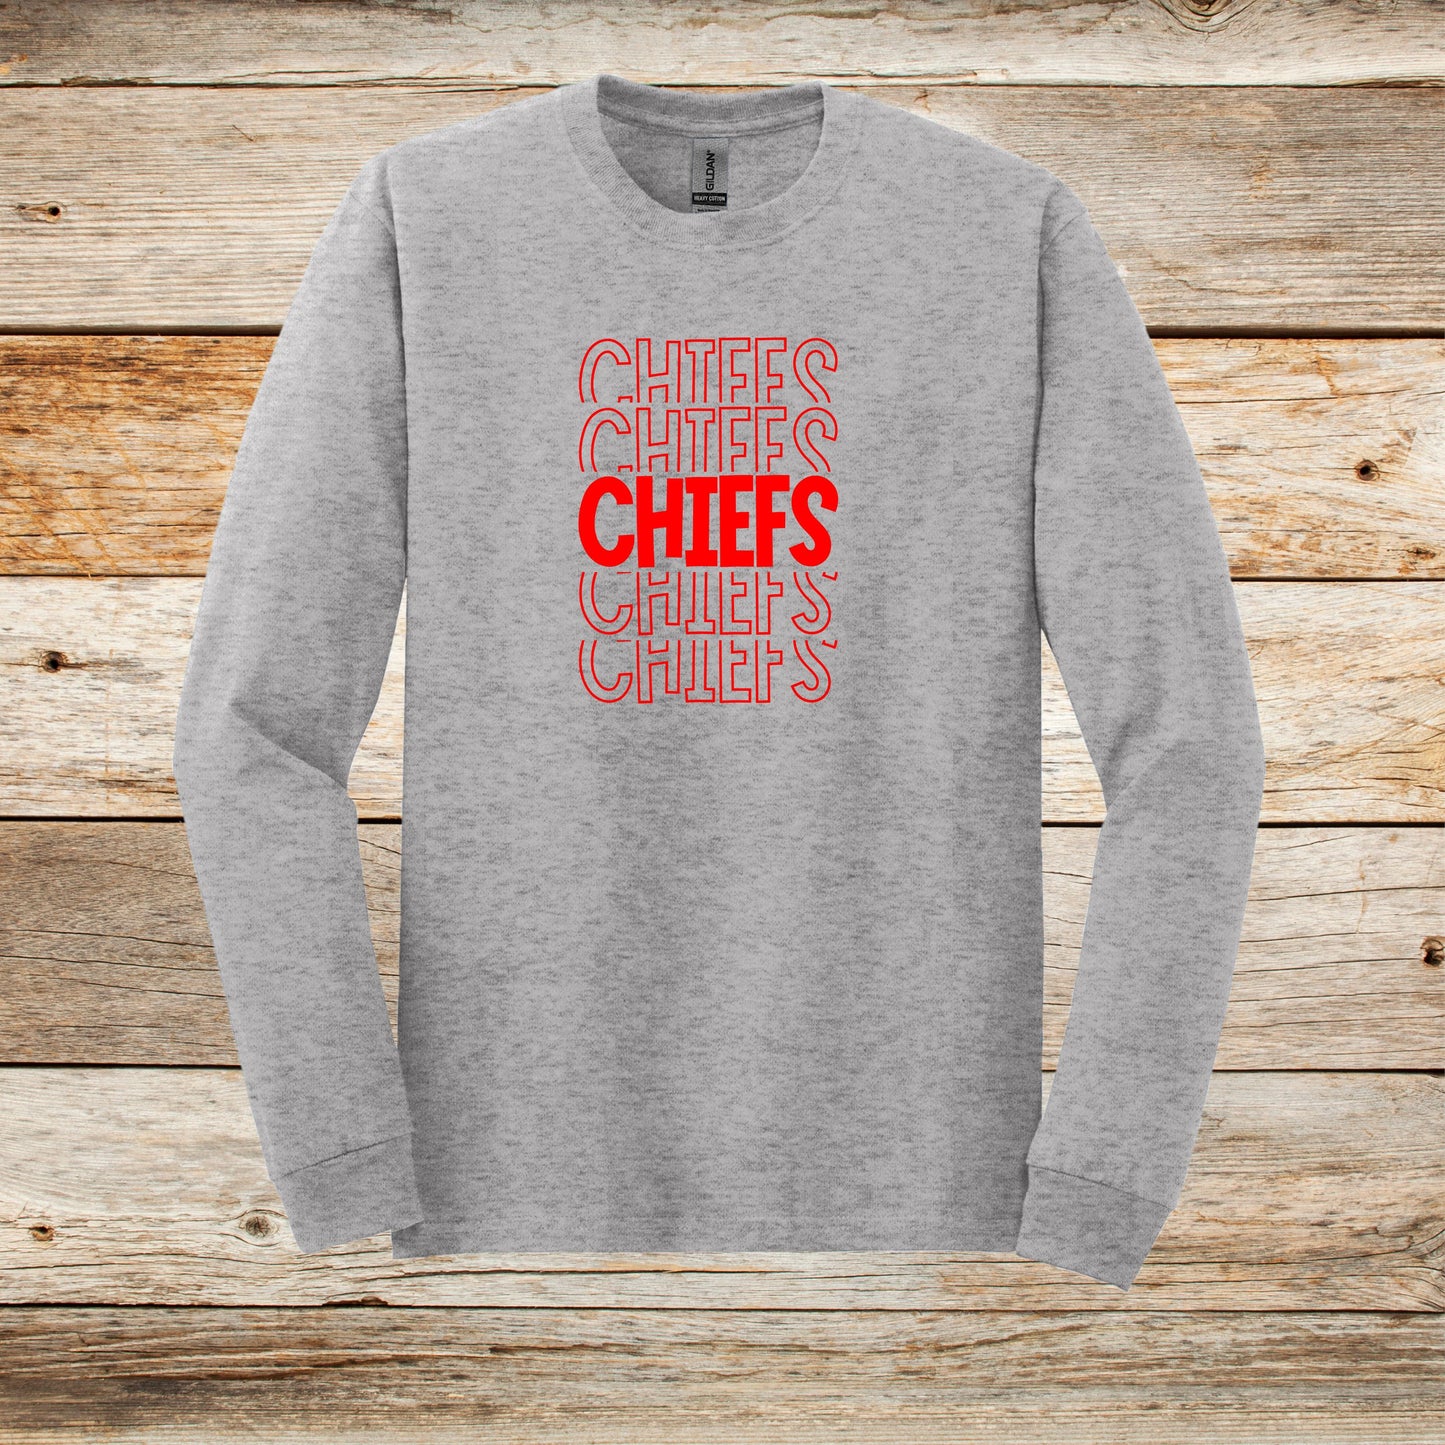 Football Long Sleeve T-Shirt - Chiefs Football - Chiefs - Adult and Children's Tee Shirts - Sports Long Sleeve T-Shirts Graphic Avenue Sport Grey Adult Small 